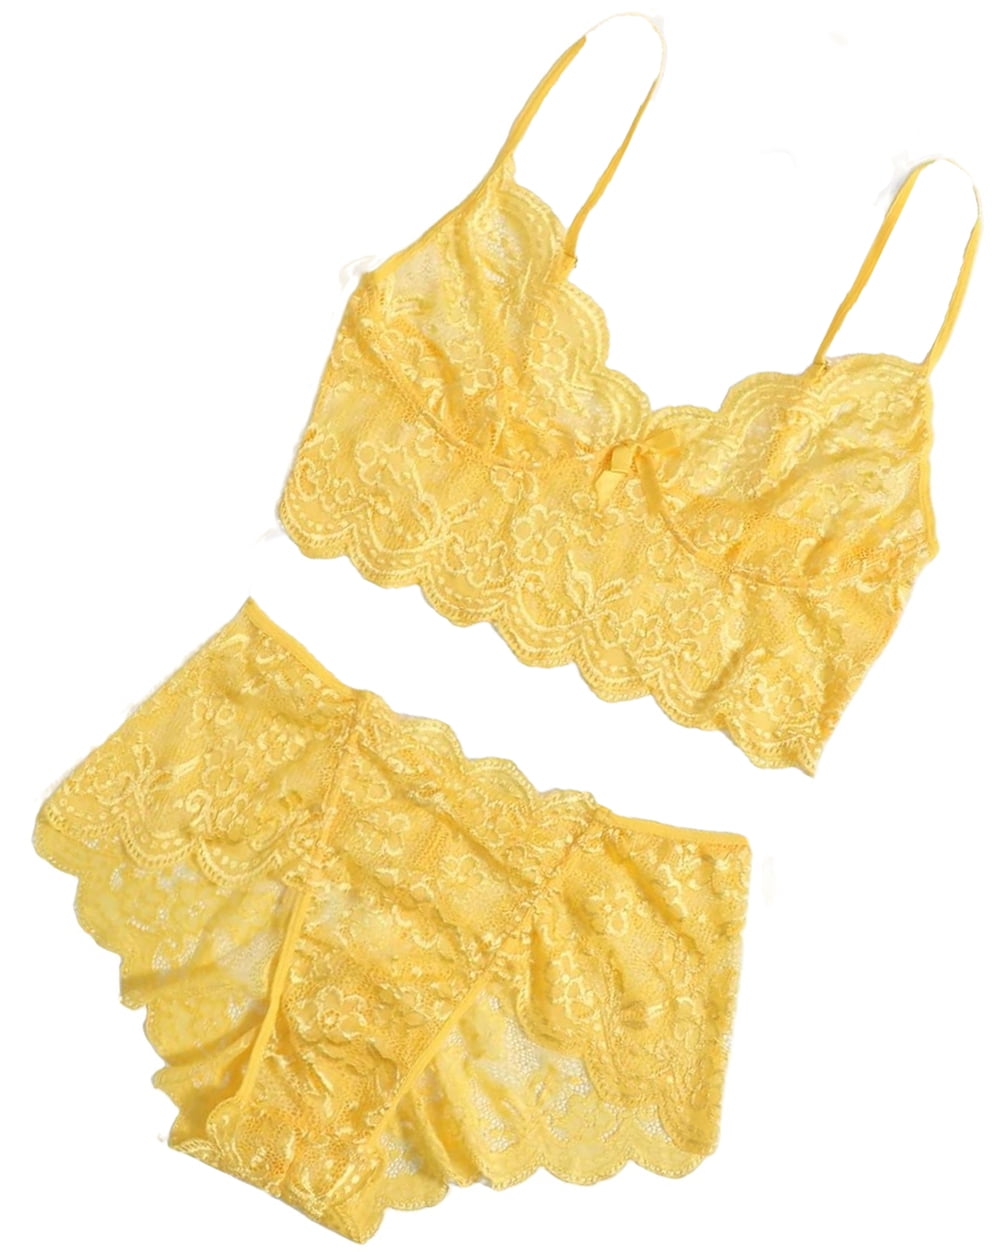 New women's lace panty sexy lingerie intimates gift plus size Yellow 11132X